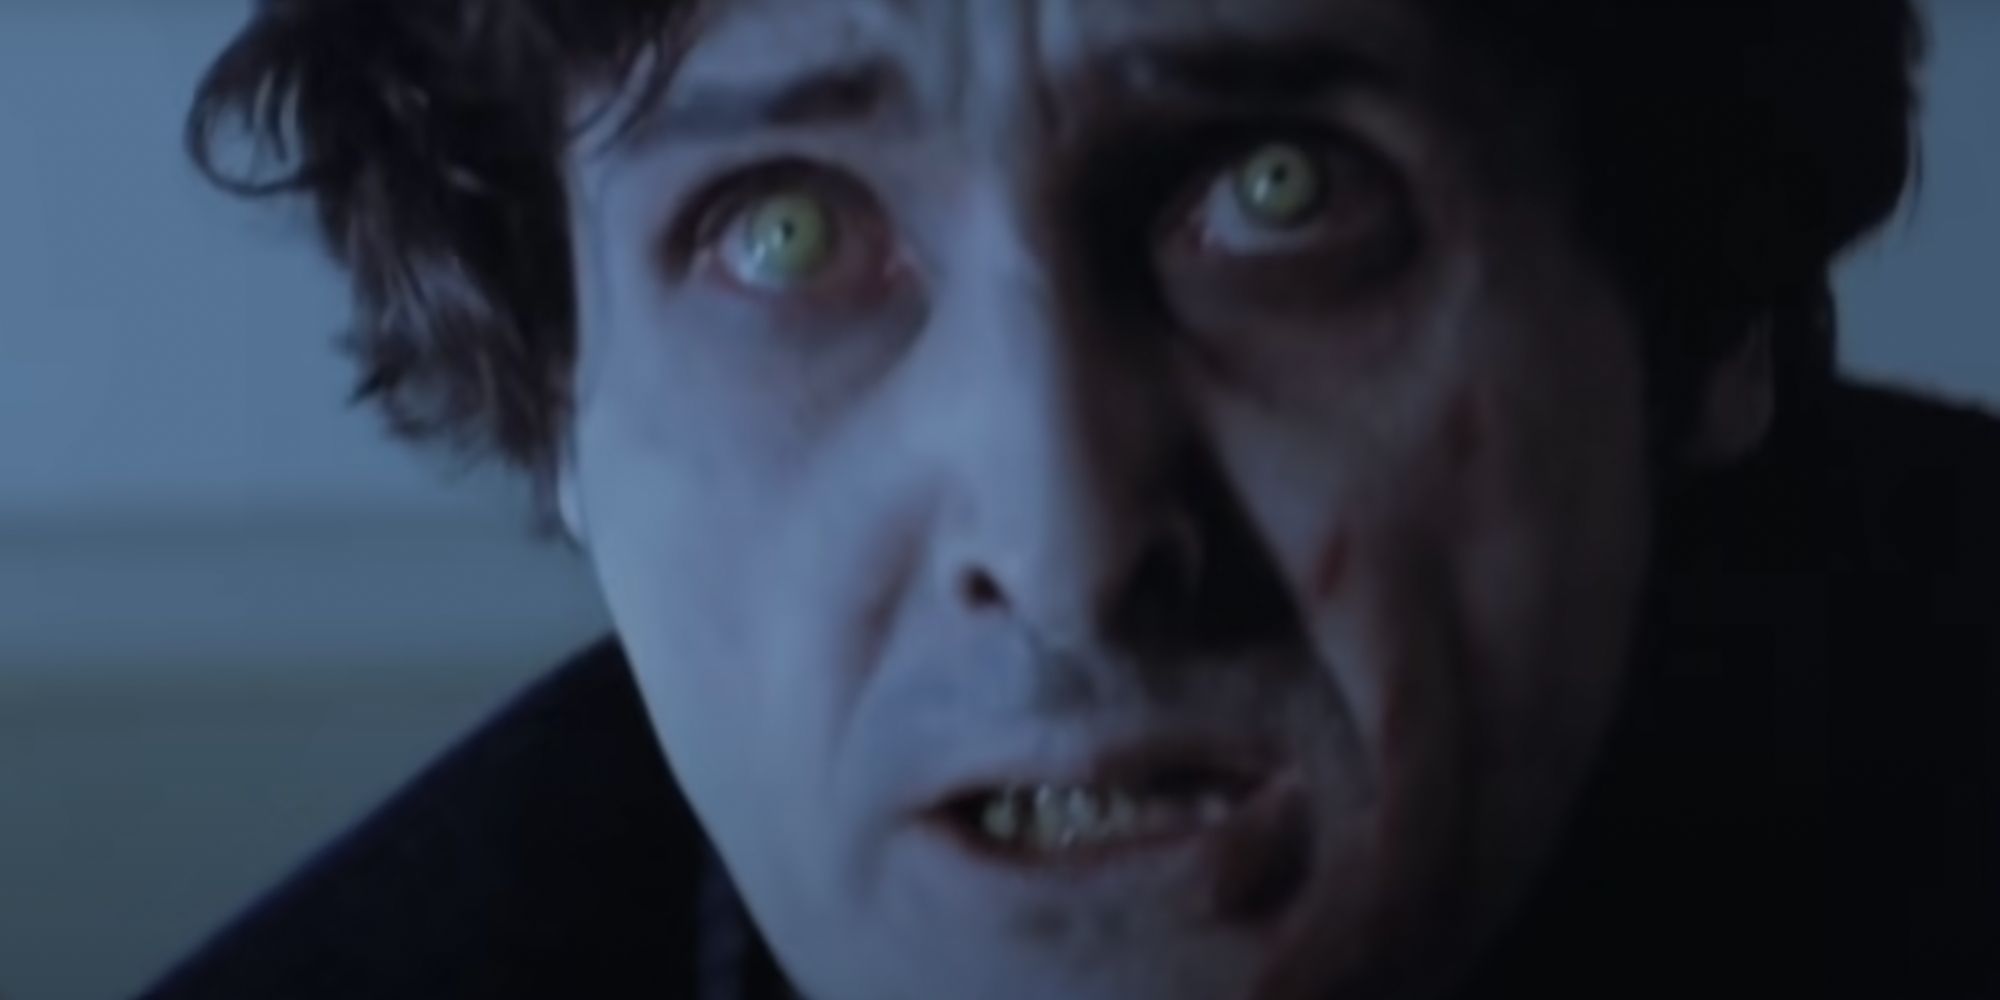  father Karras possessed in The Exorcist's ending